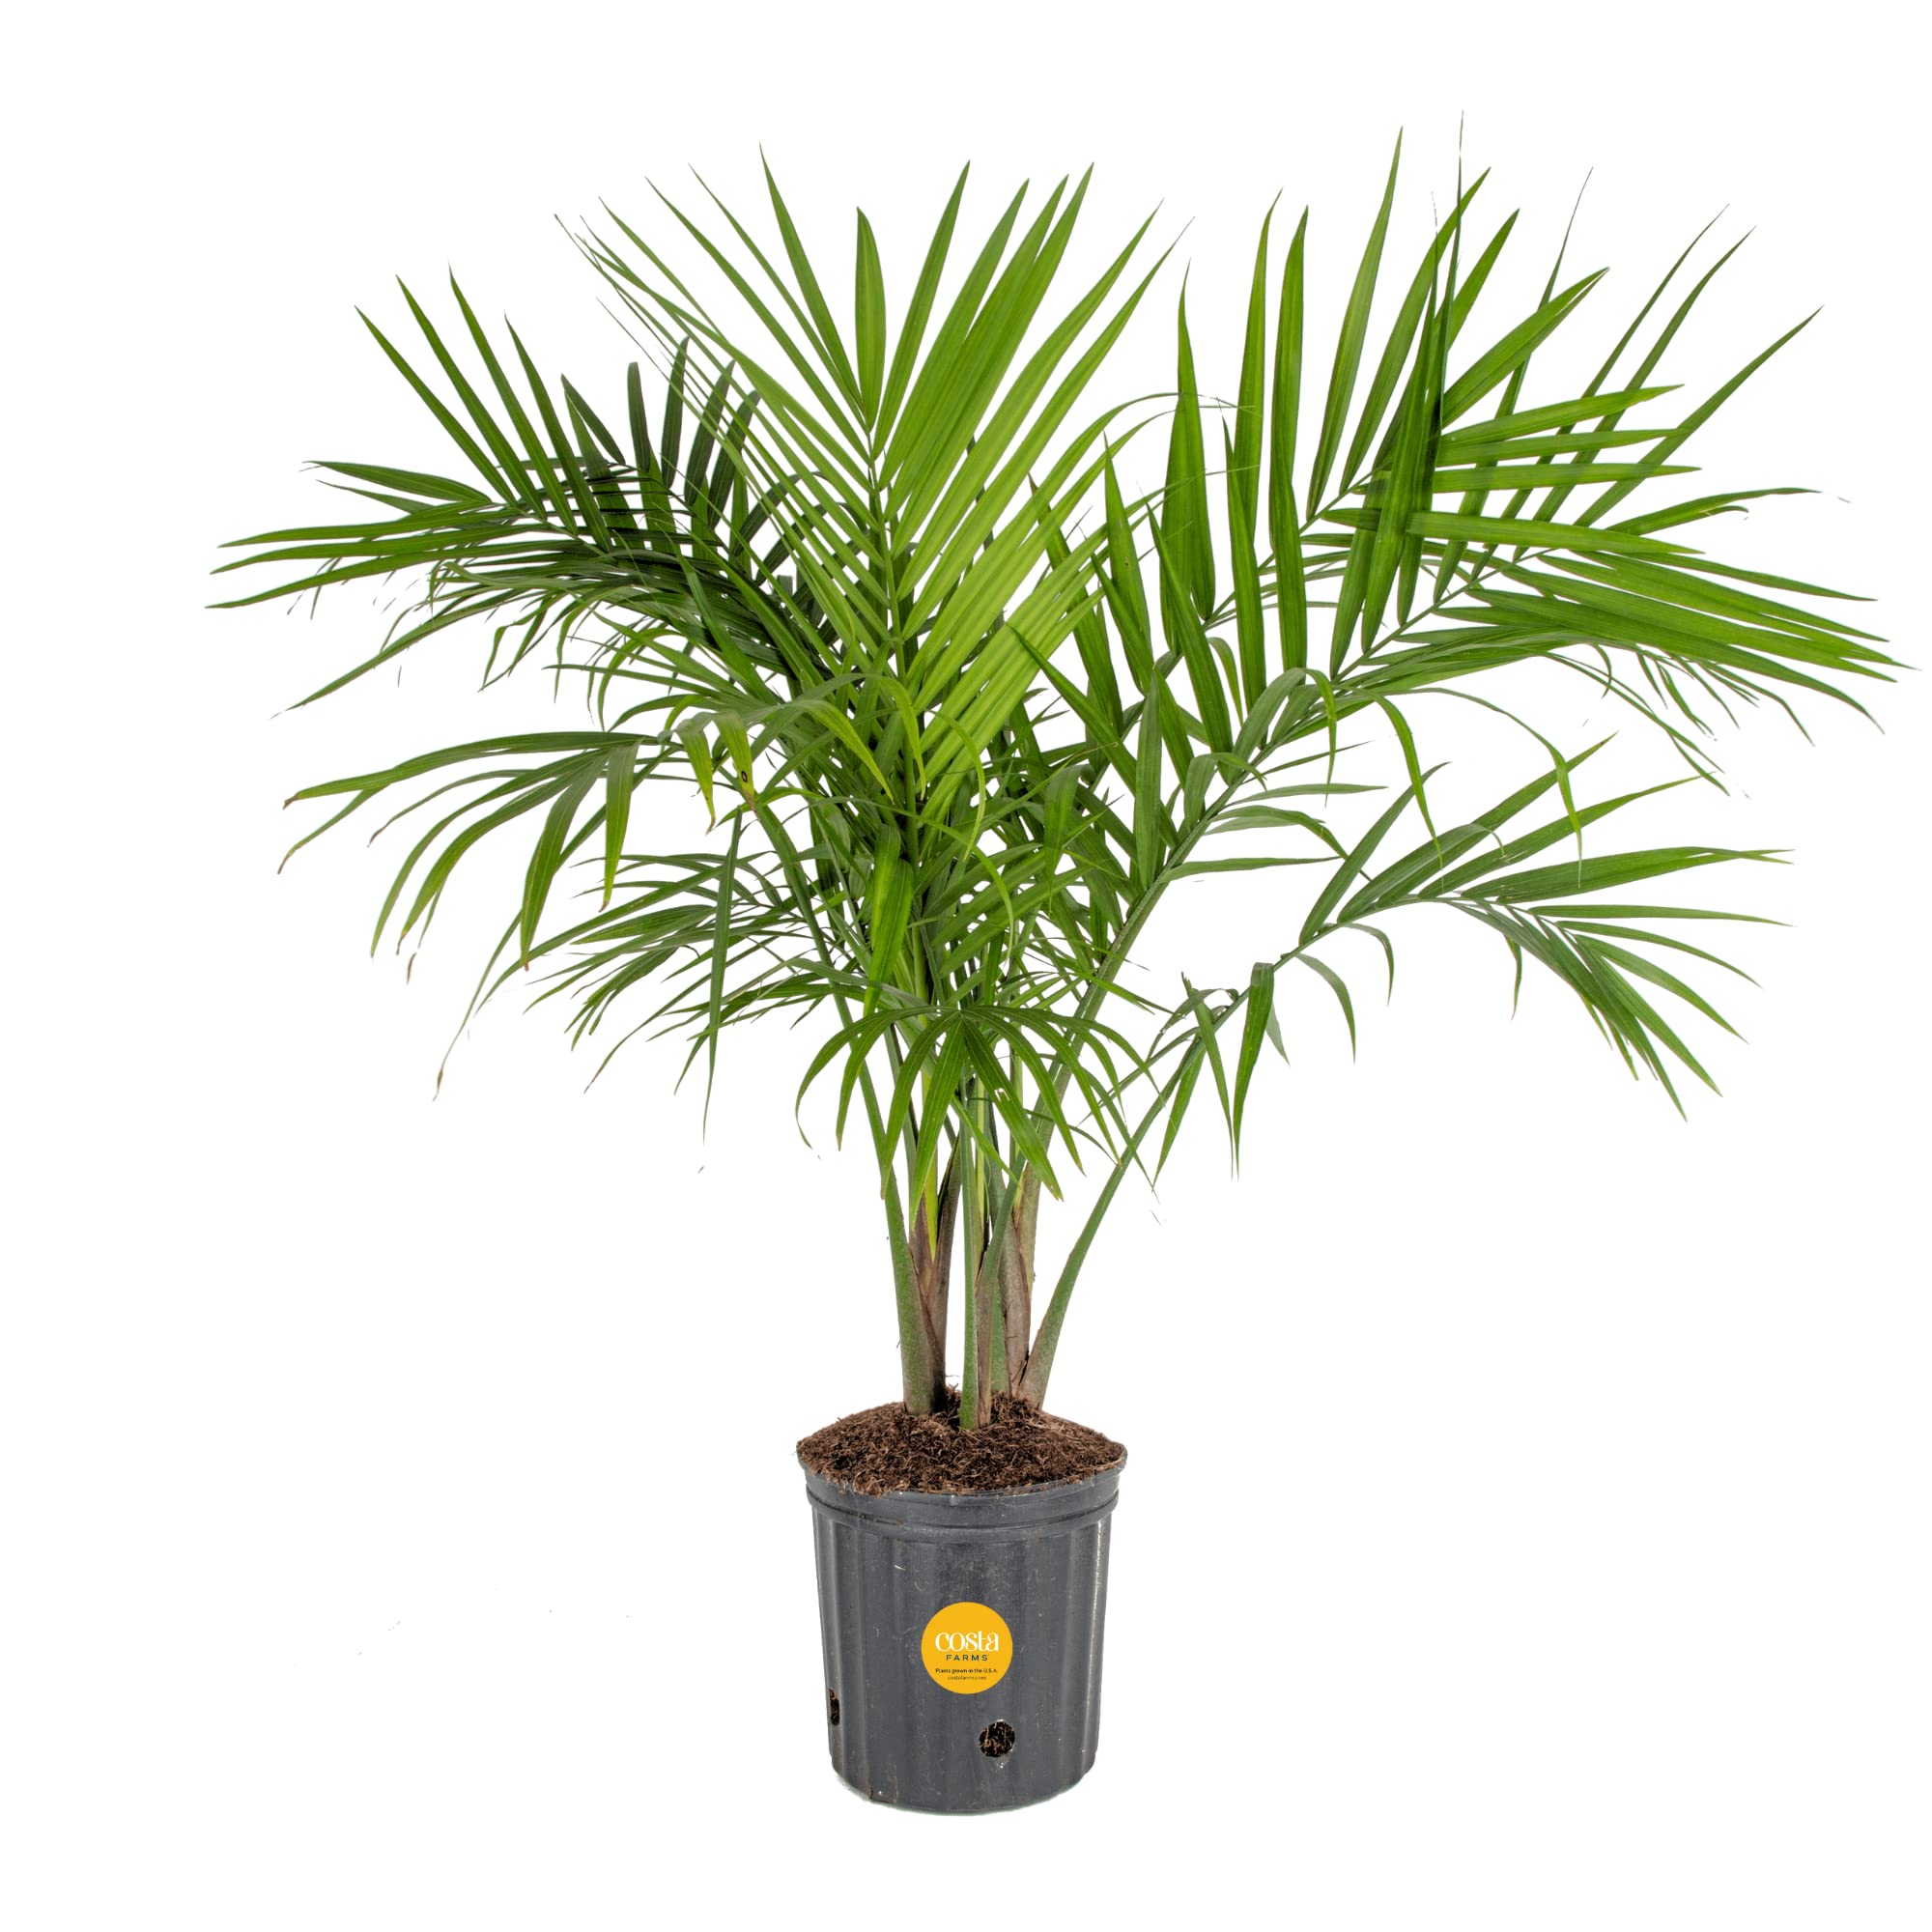 3'-4' Costa Farms Majesty Palm Tree Live Indoor Potted Plant $27 + Free Shipping w/ Prime